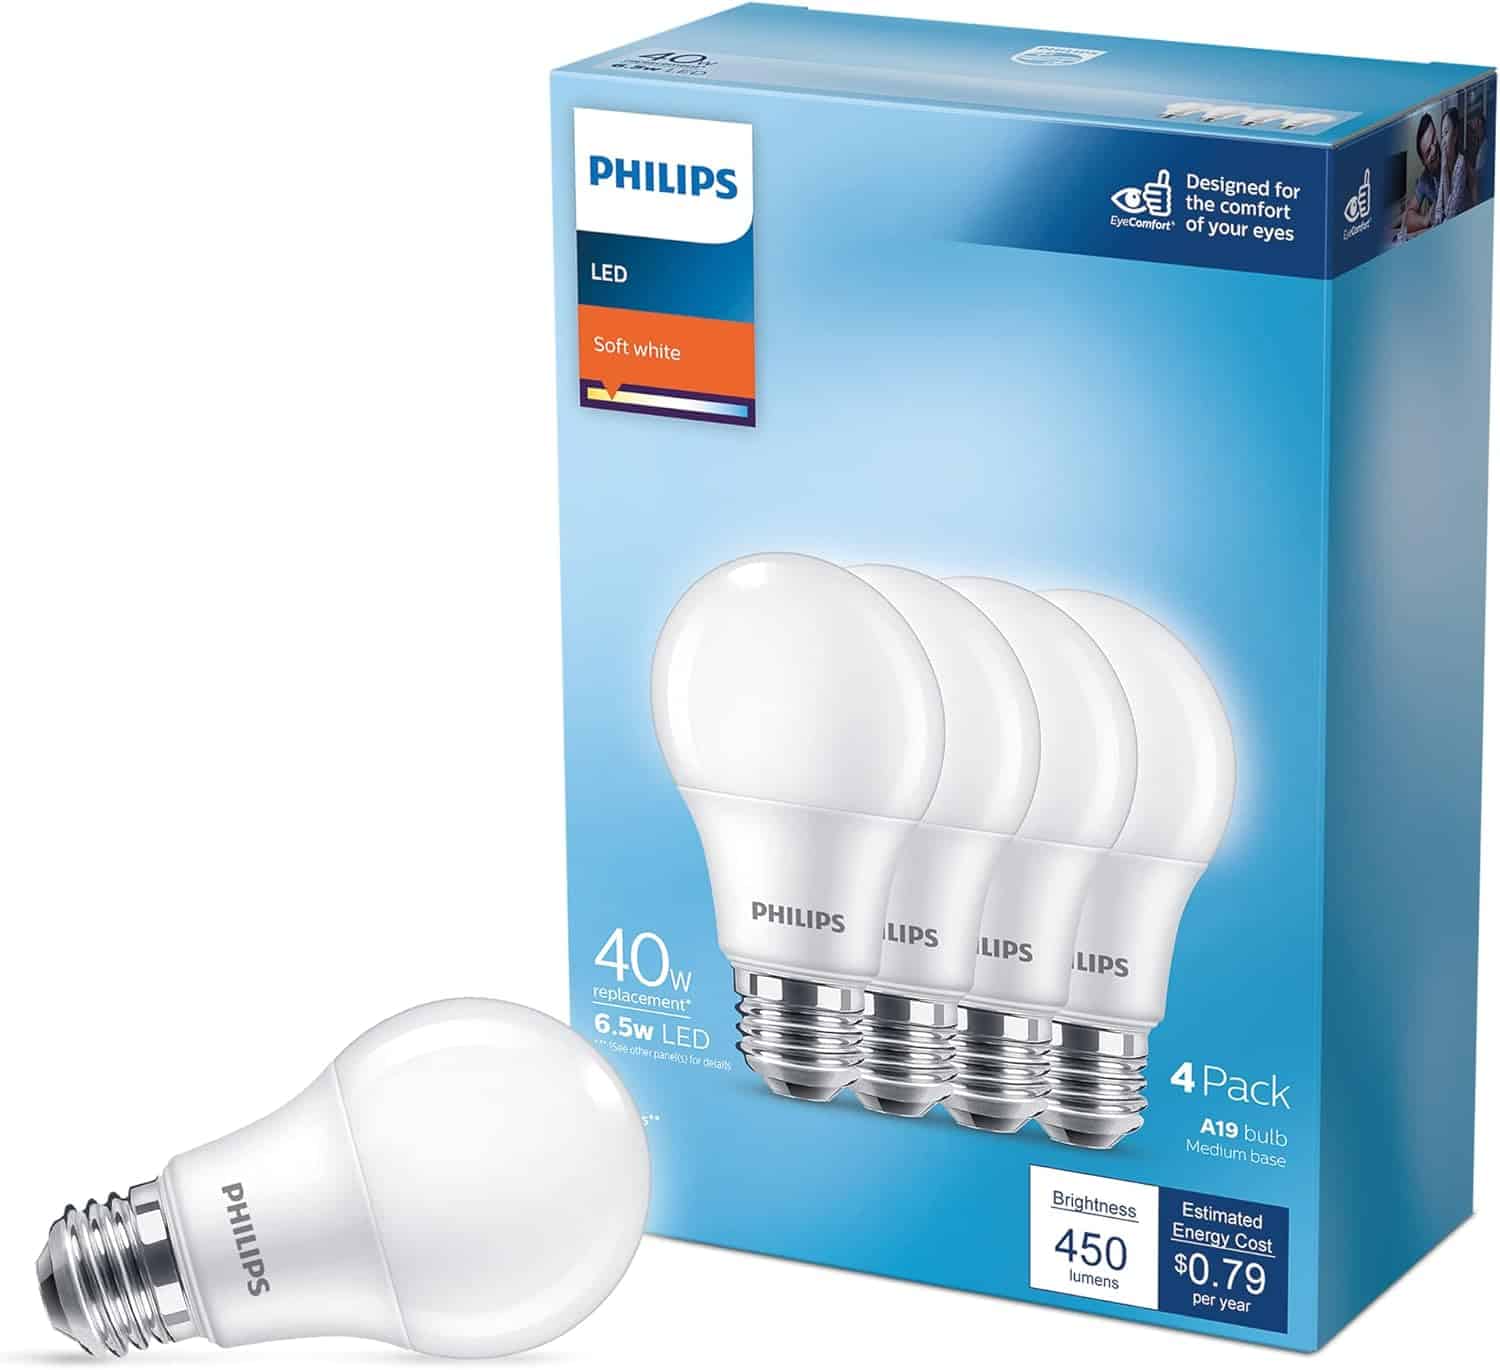 Philips LED Basic Frosted Dimmable A19 Light Bulb - EyeComfort Technology - 450 Lumen - Soft White (2700K) - 6.5W=40W - E26 Base - Indoor (Pack of 4)